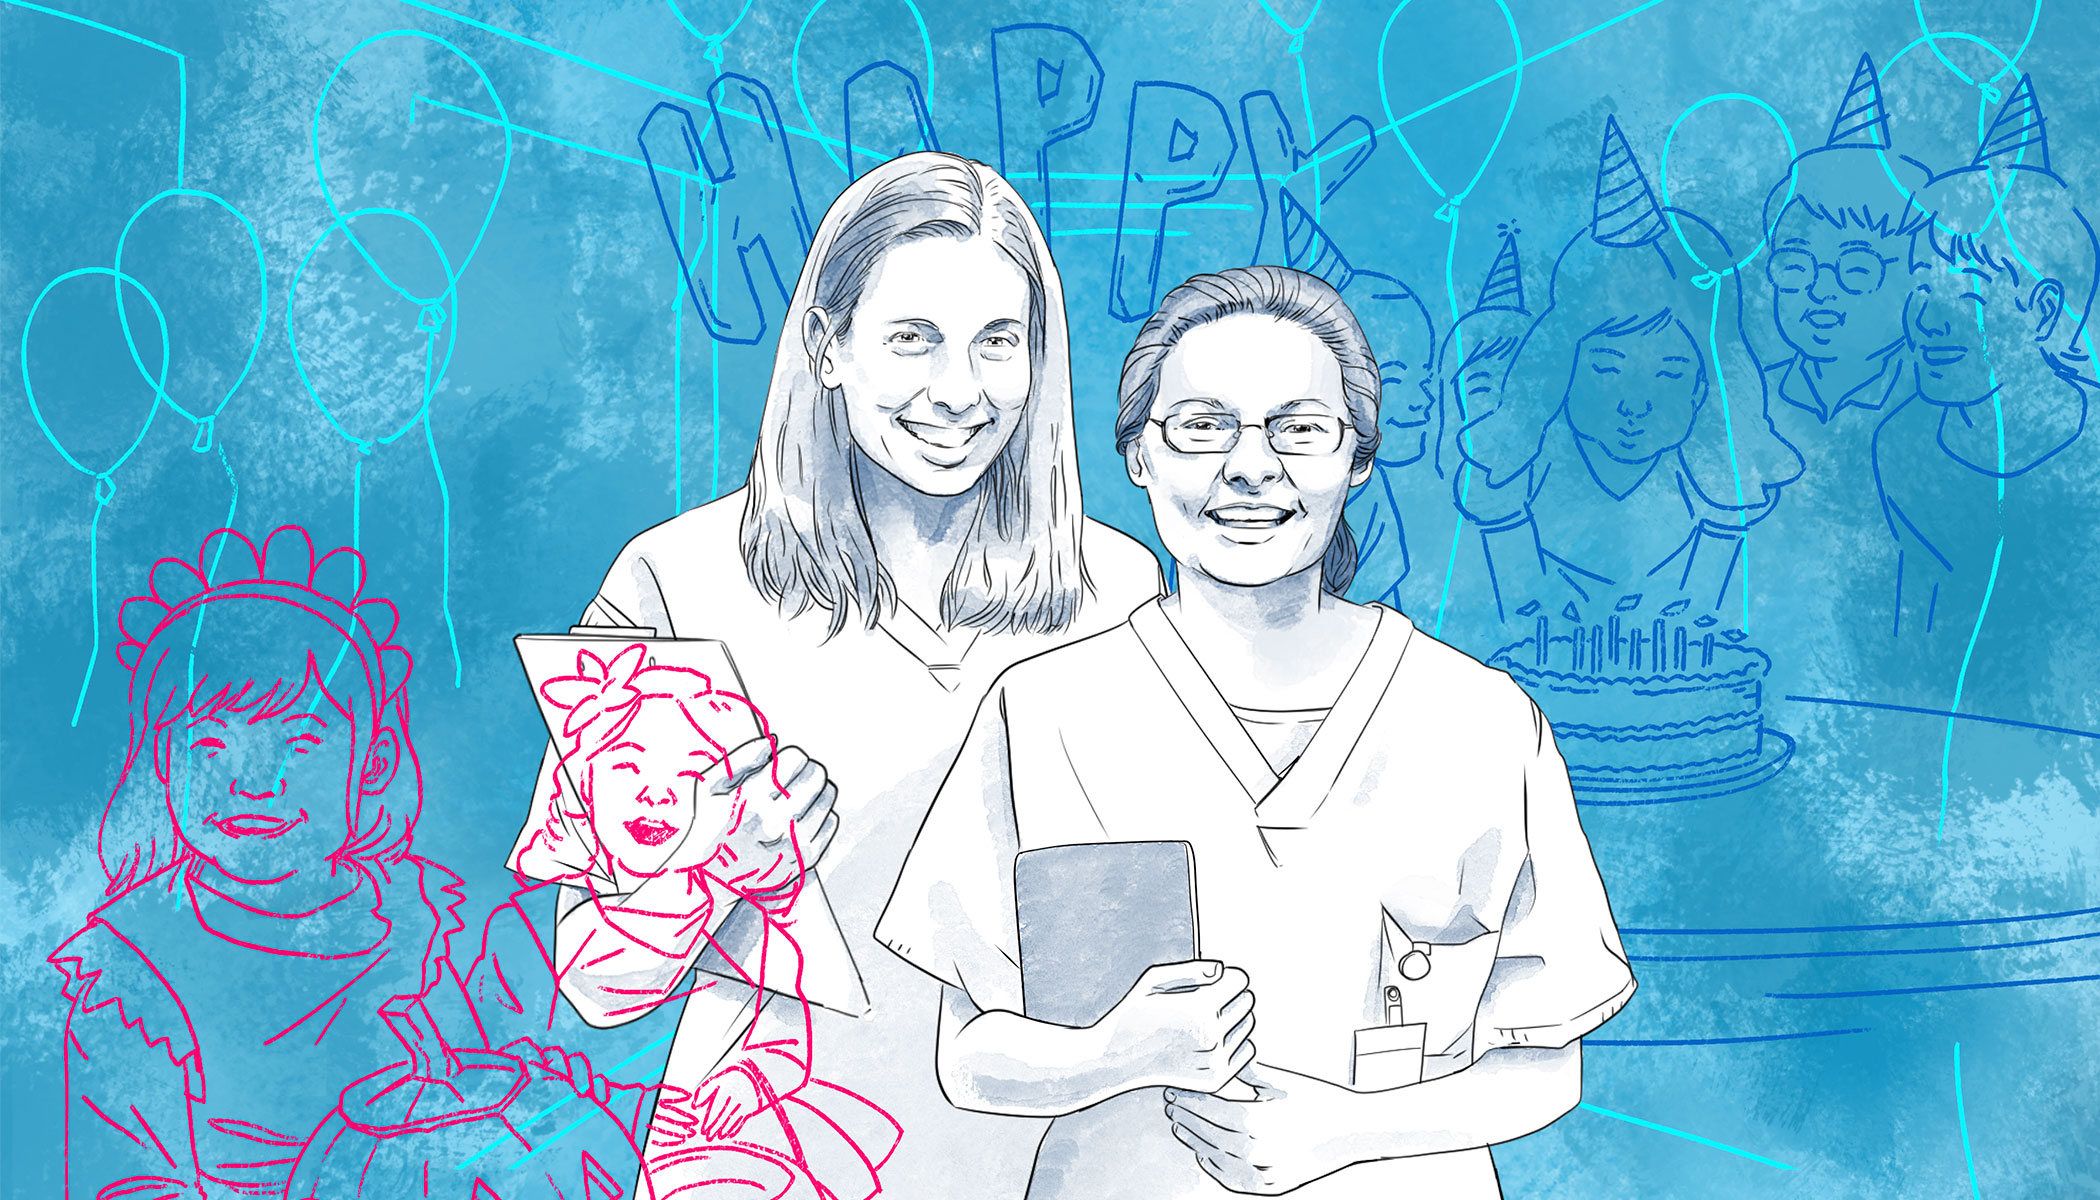 An illustration of two women smiling, and illustrations of children behind them. 